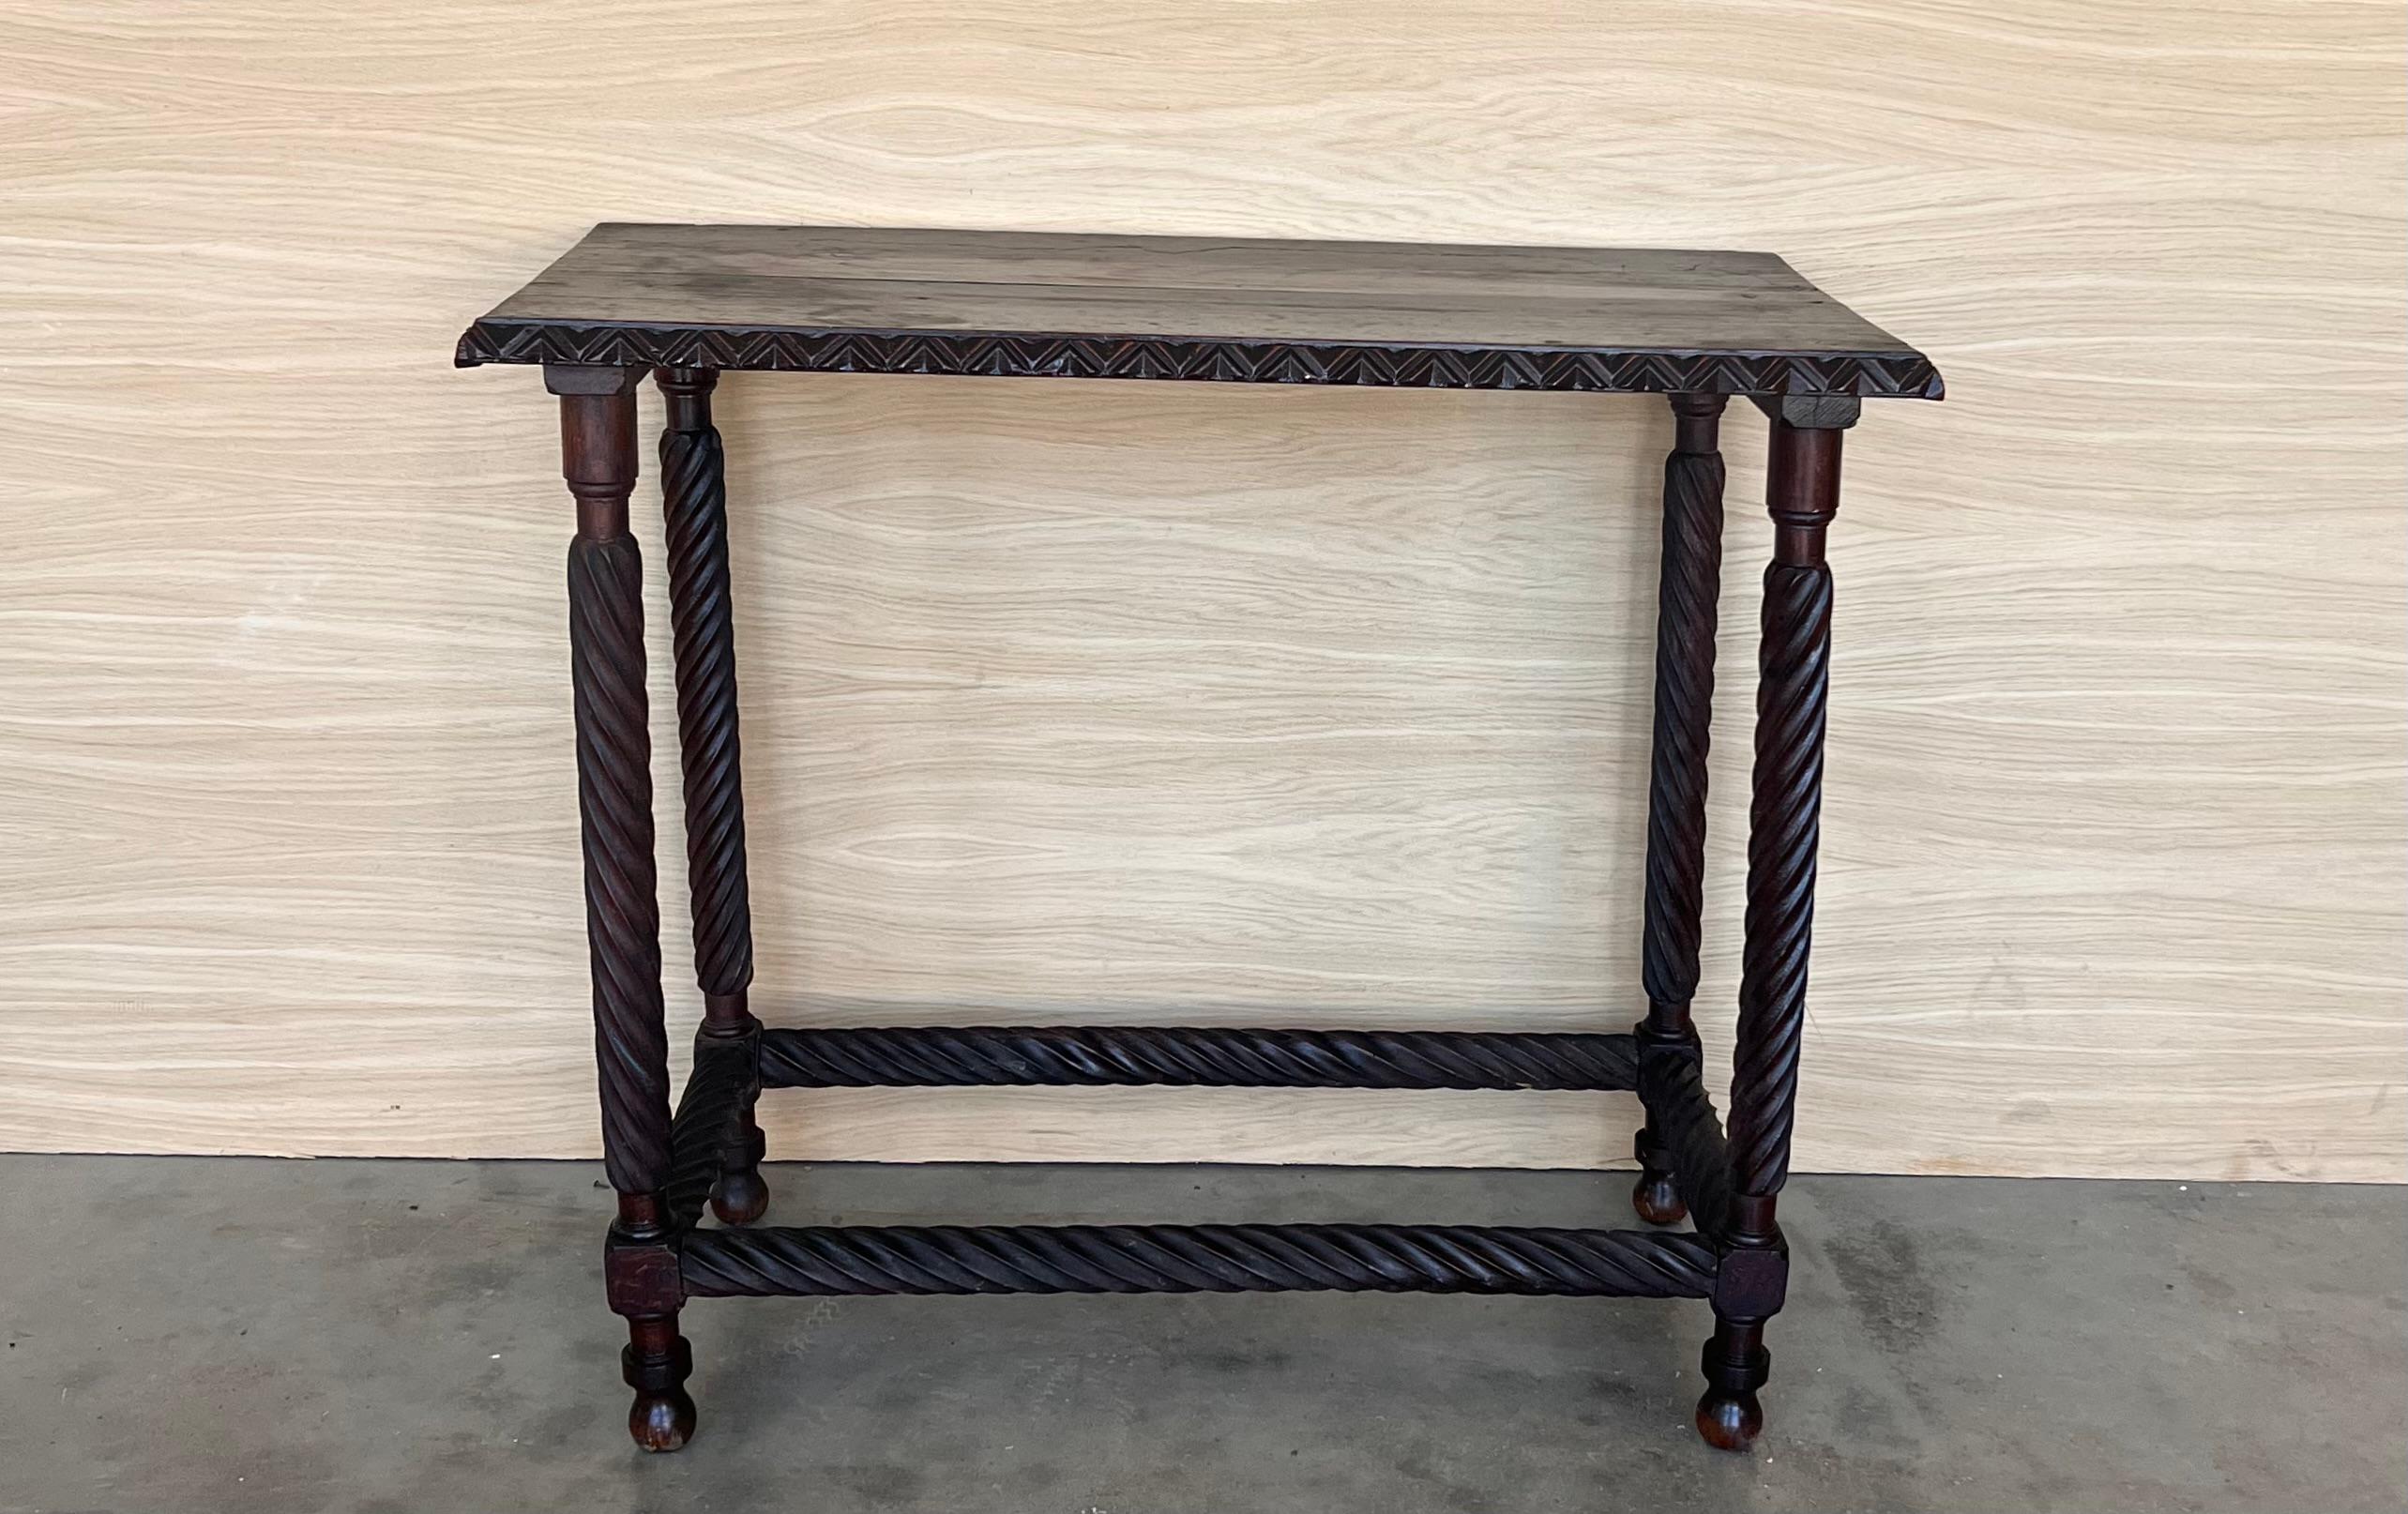 19th Spanish side table with cared Solomonic turned legs and carved edges in top
